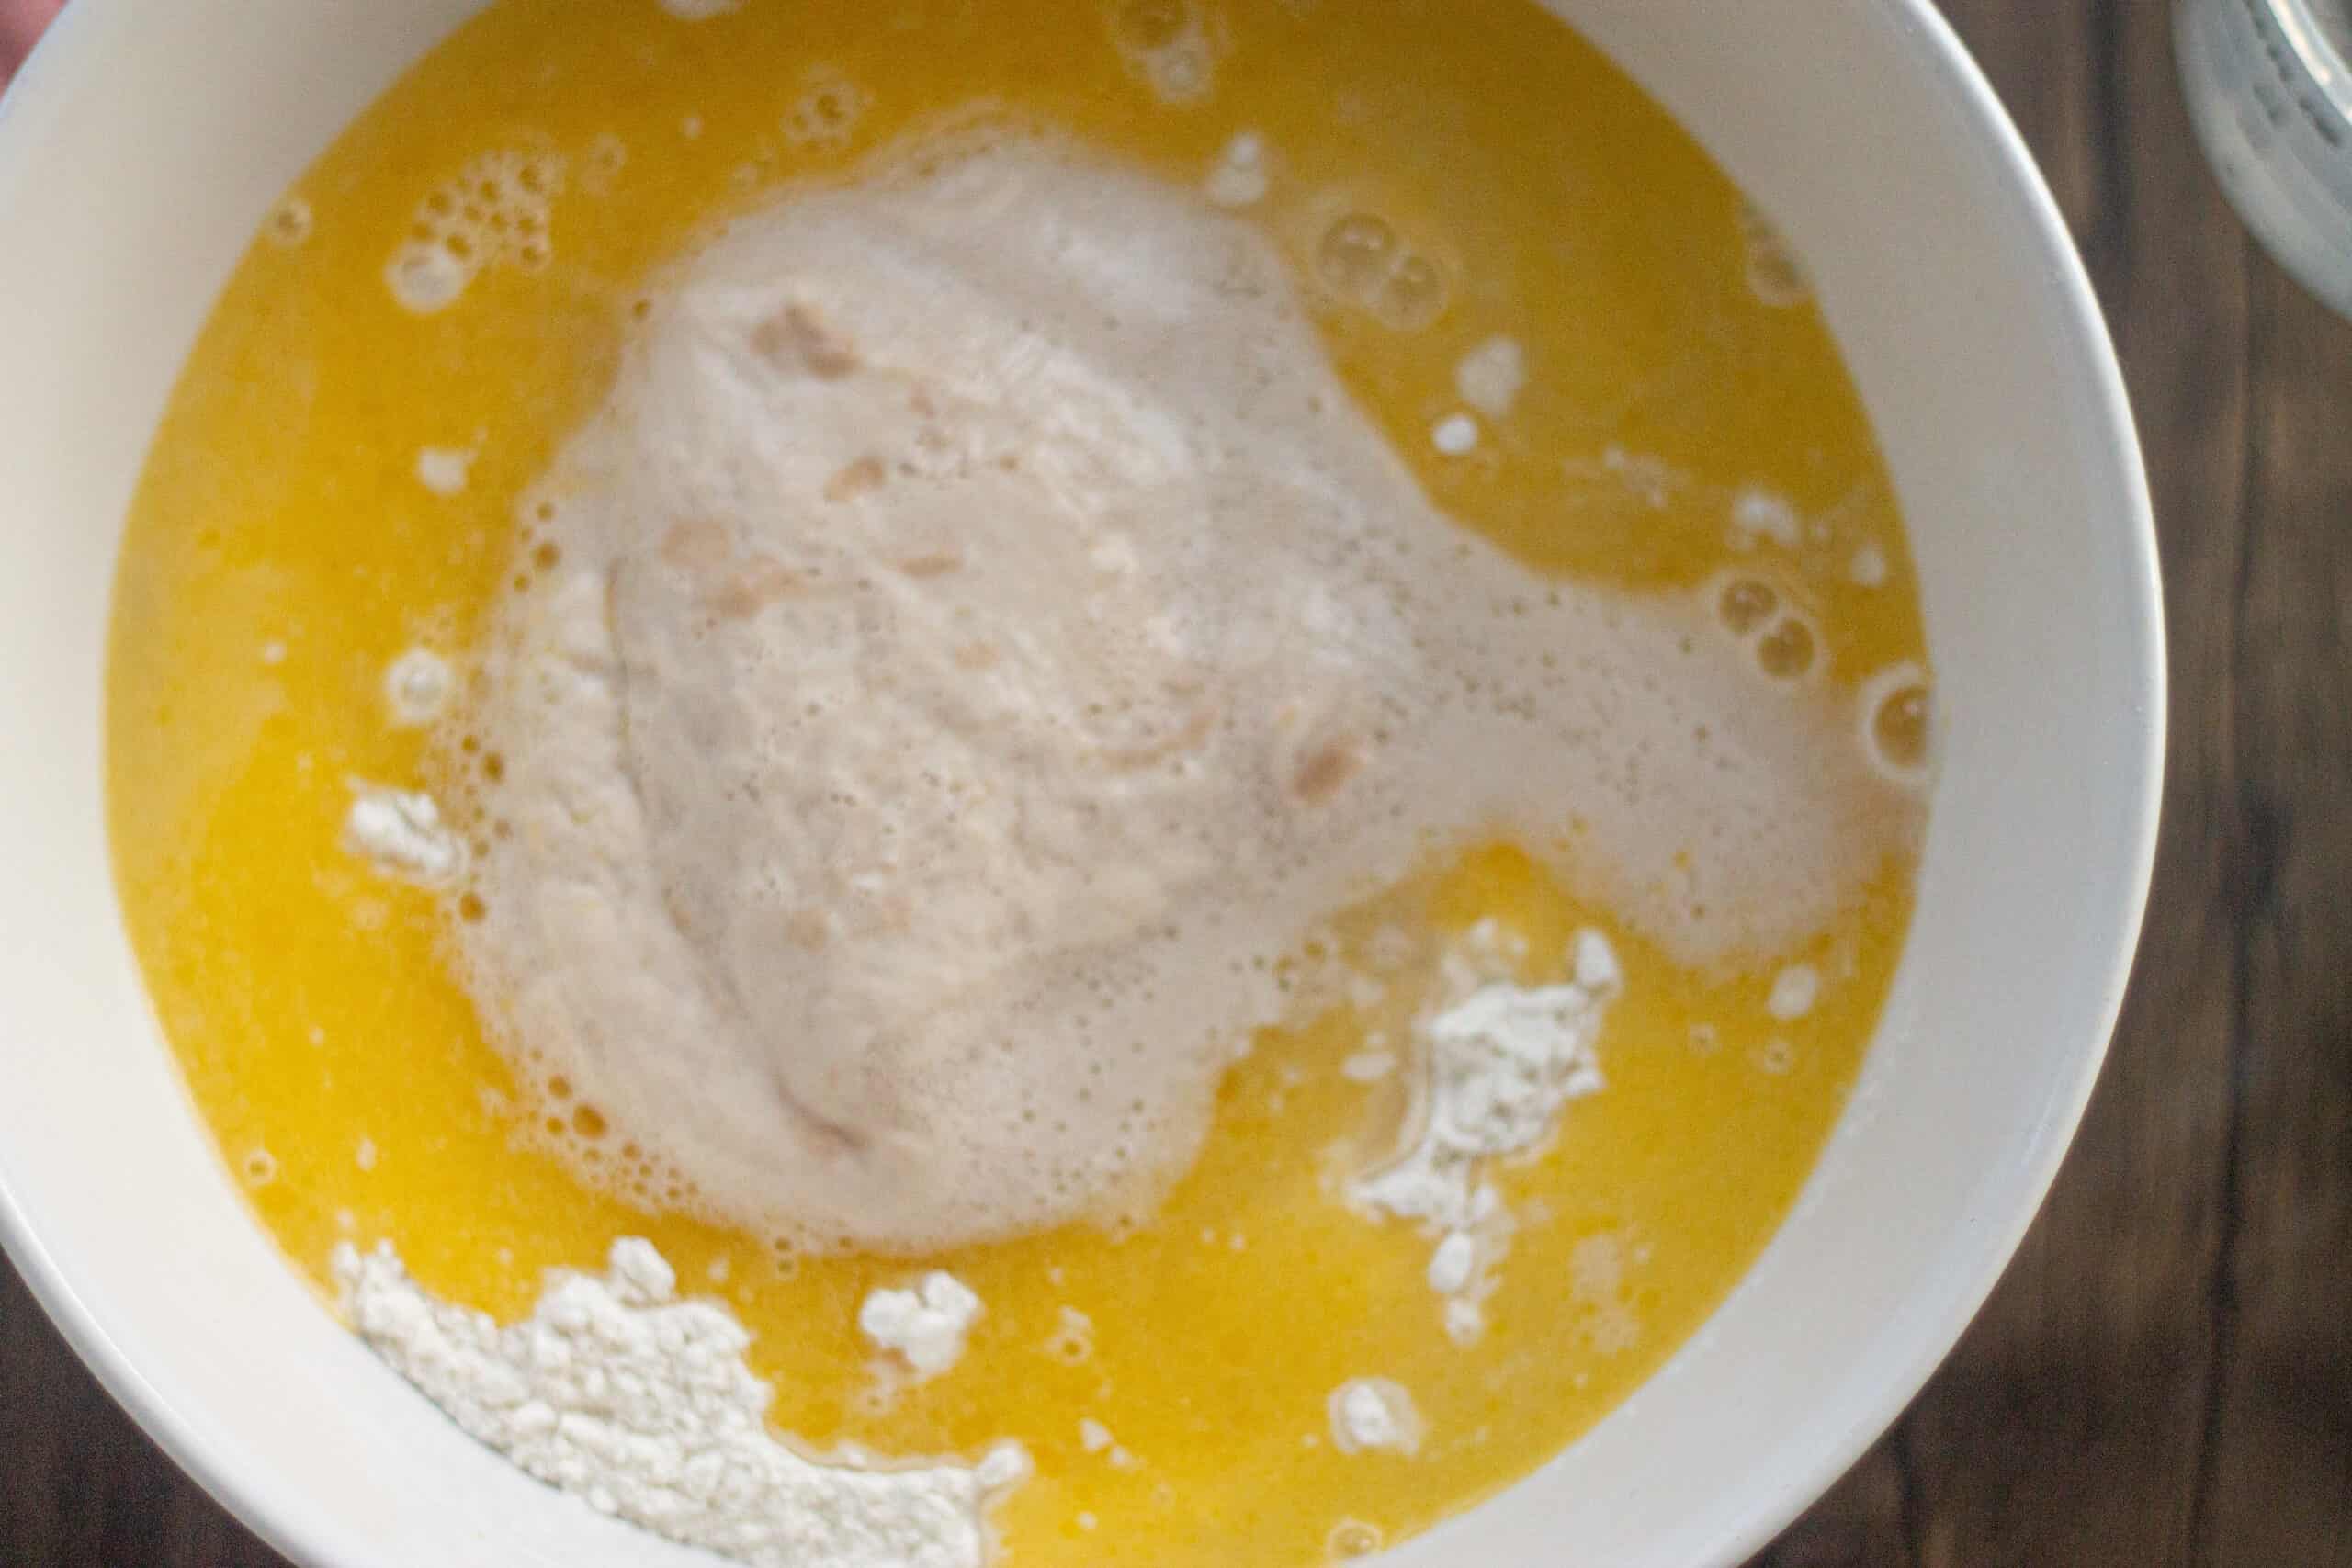 Adding yeast to melted butter and flour